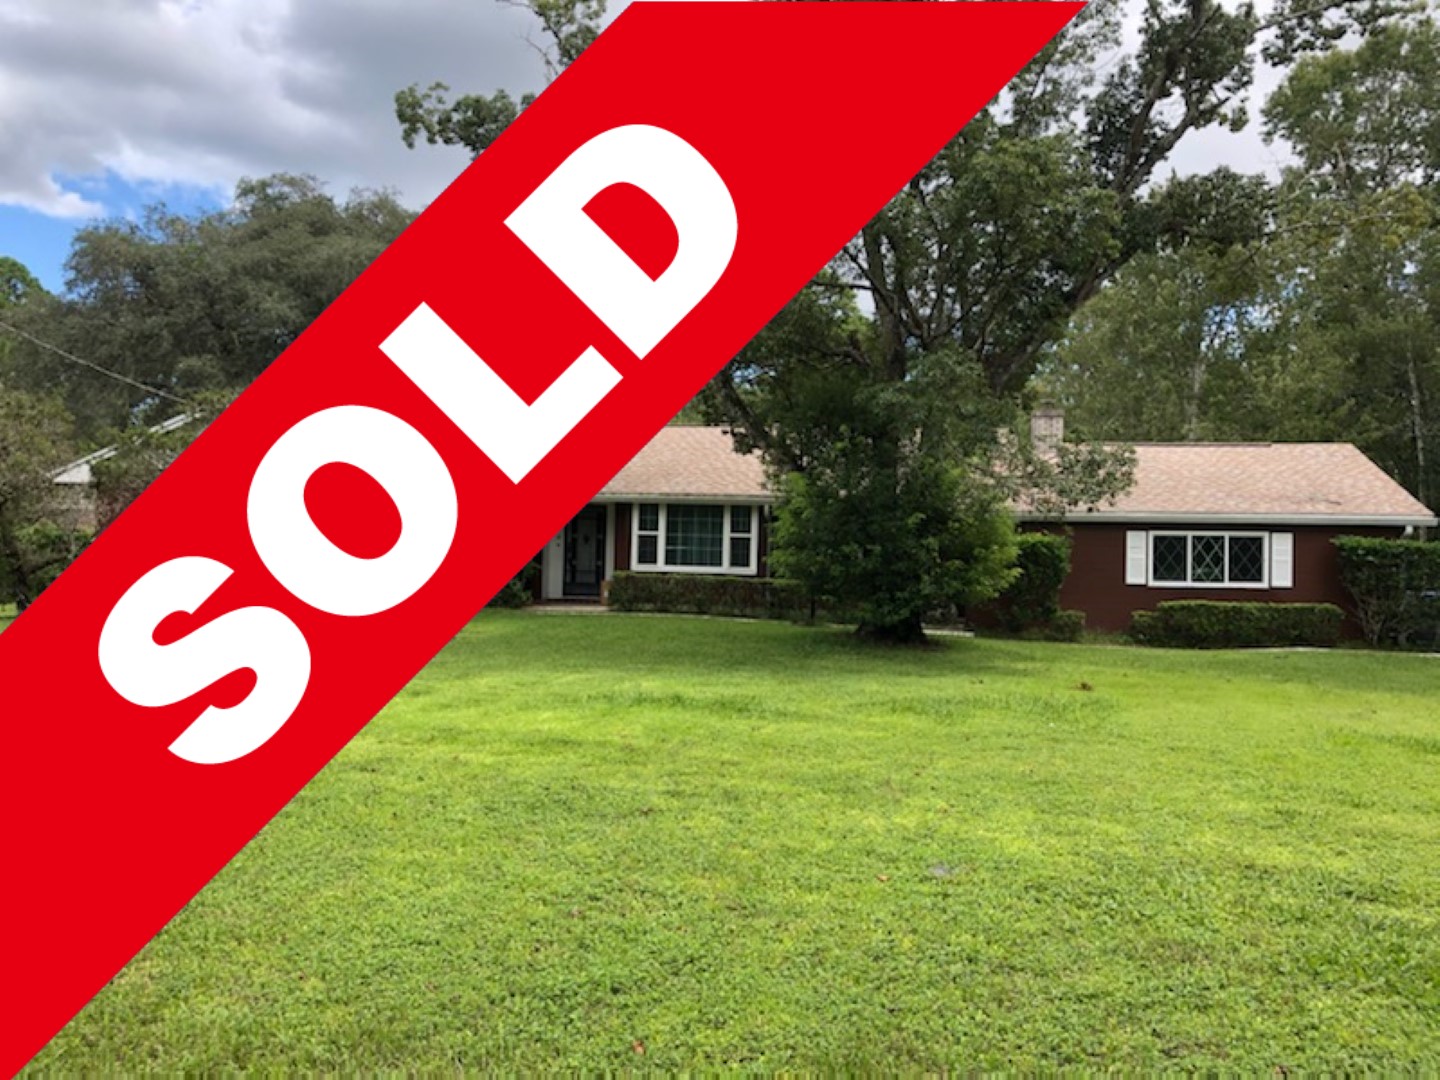 SOLD! 3BR/3BA home with lots of potential on 1.3 acres!